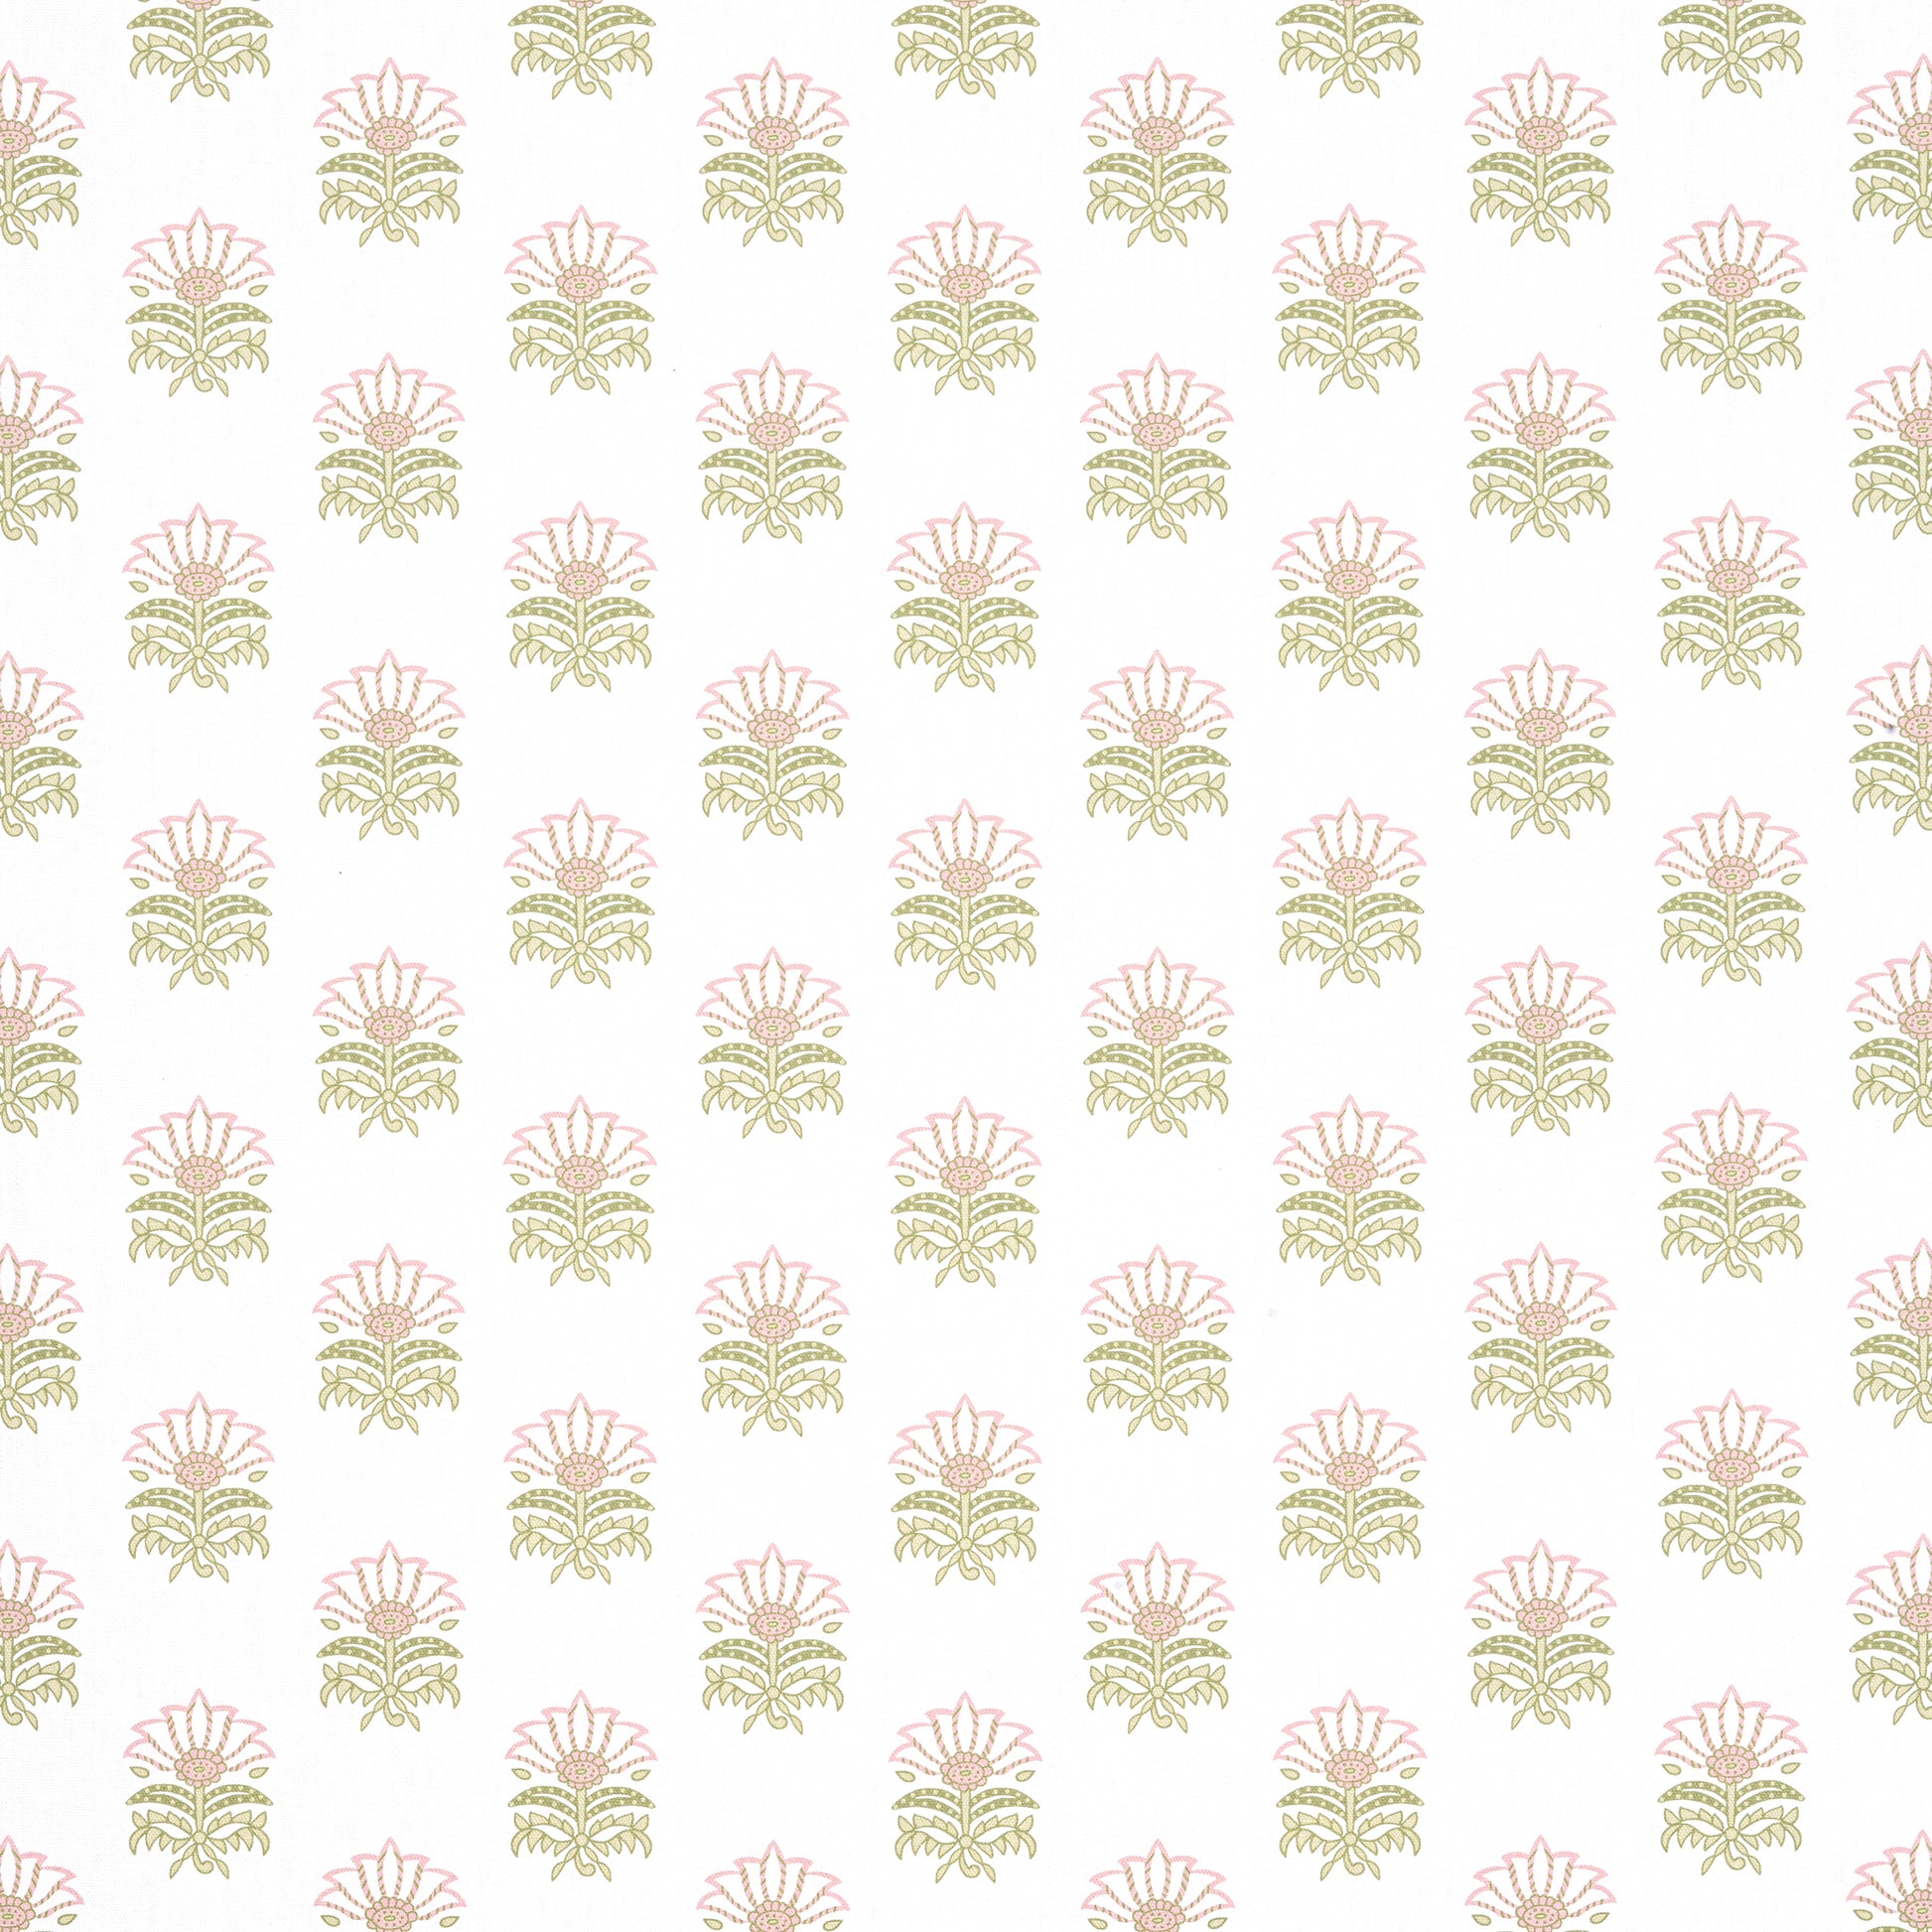 Purchase  Ann French Fabric SKU# AF15155  pattern name  Milford